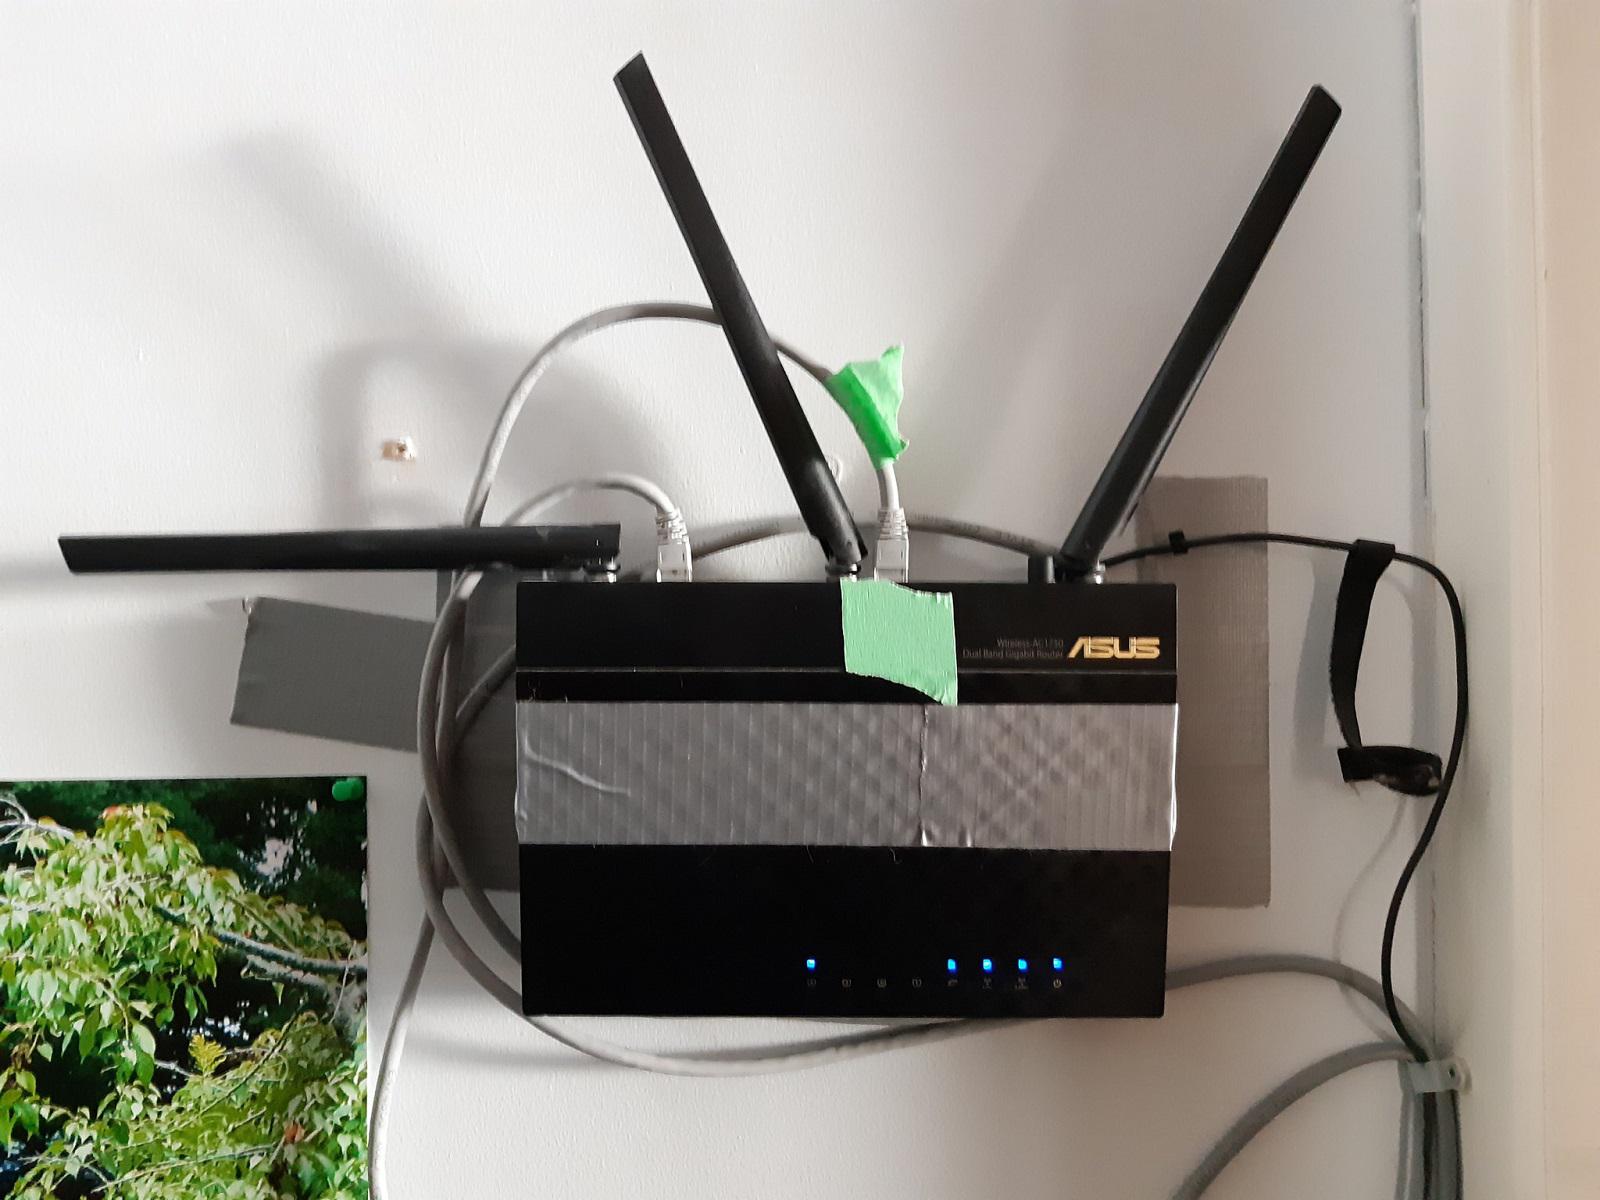 router on an elevated position